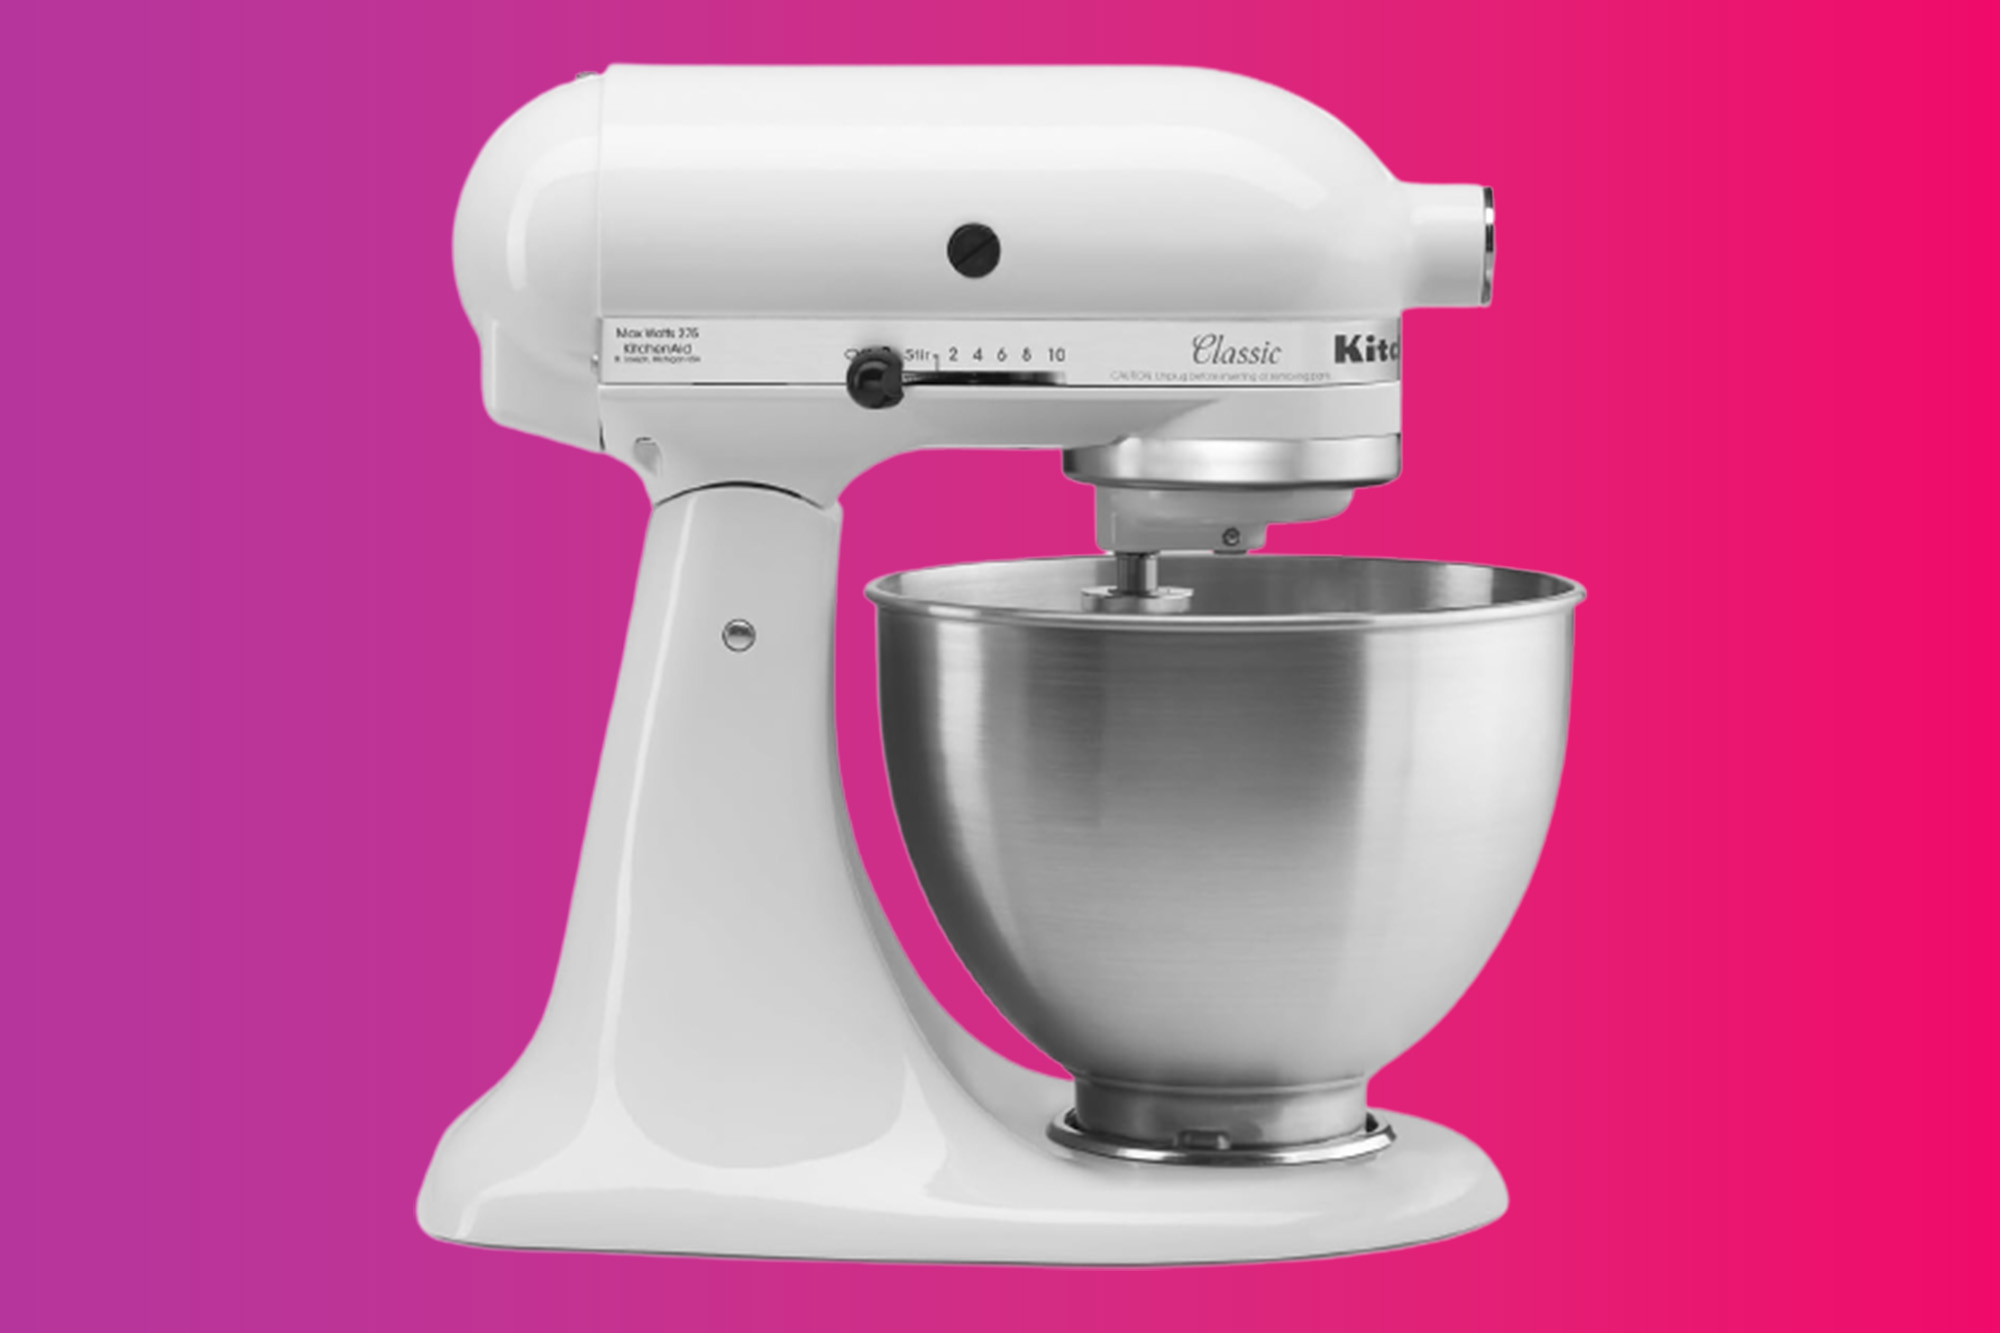 STAND MIXER PASTA ROLLER/CUTTE – Things are Cooking